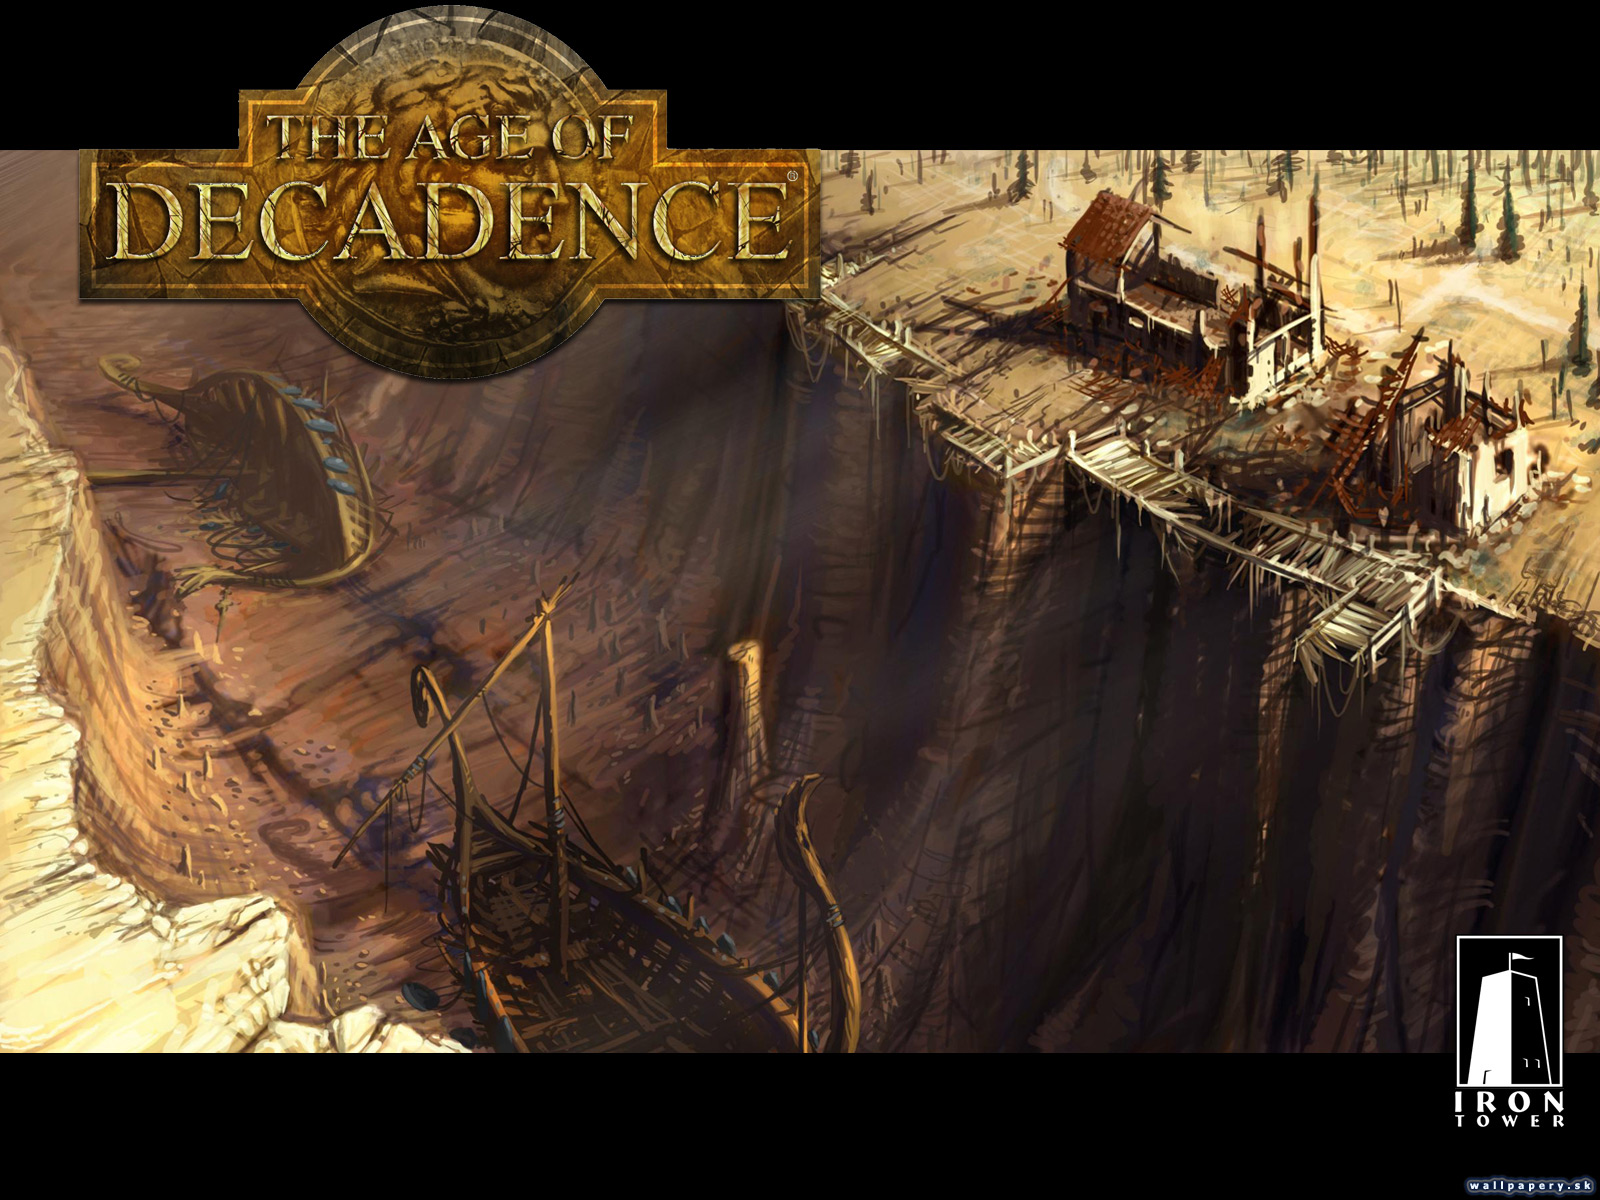 The Age of Decadence - wallpaper 4